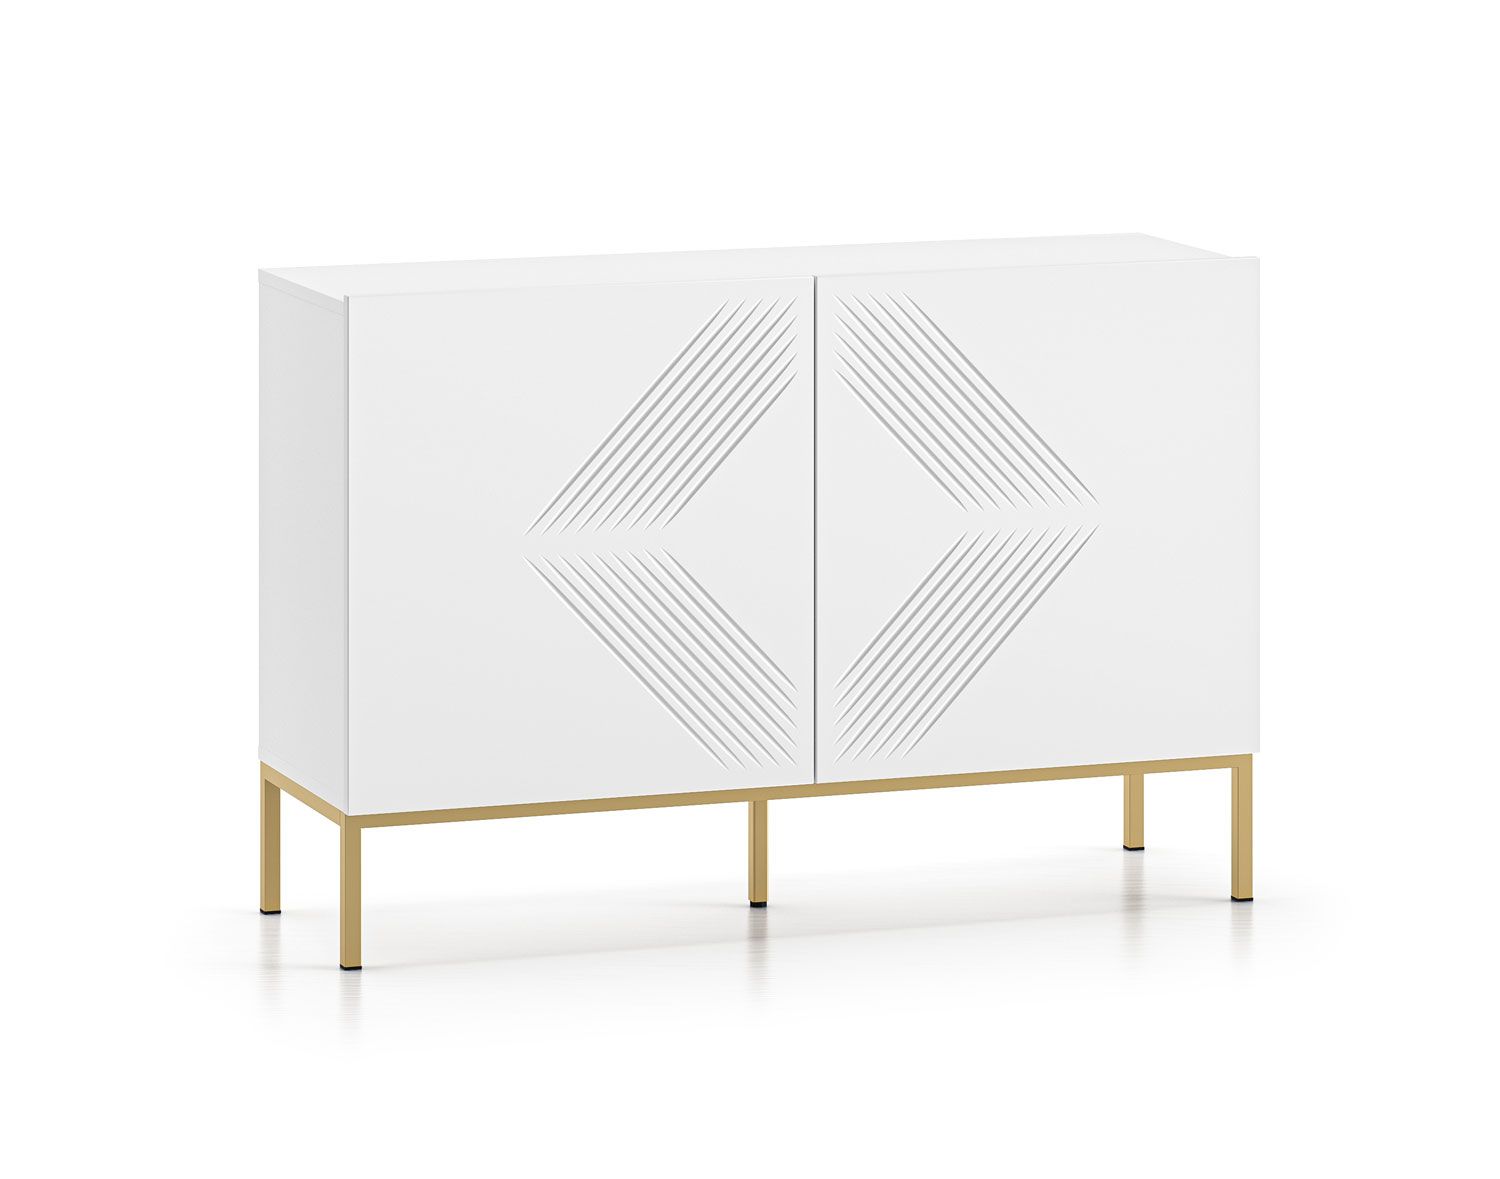 Chest of drawers with metal legs Taos 12, color: white matt, legs: gold, dimensions: 77 x 114 x 37 cm, with two doors and four compartments, easy to combine